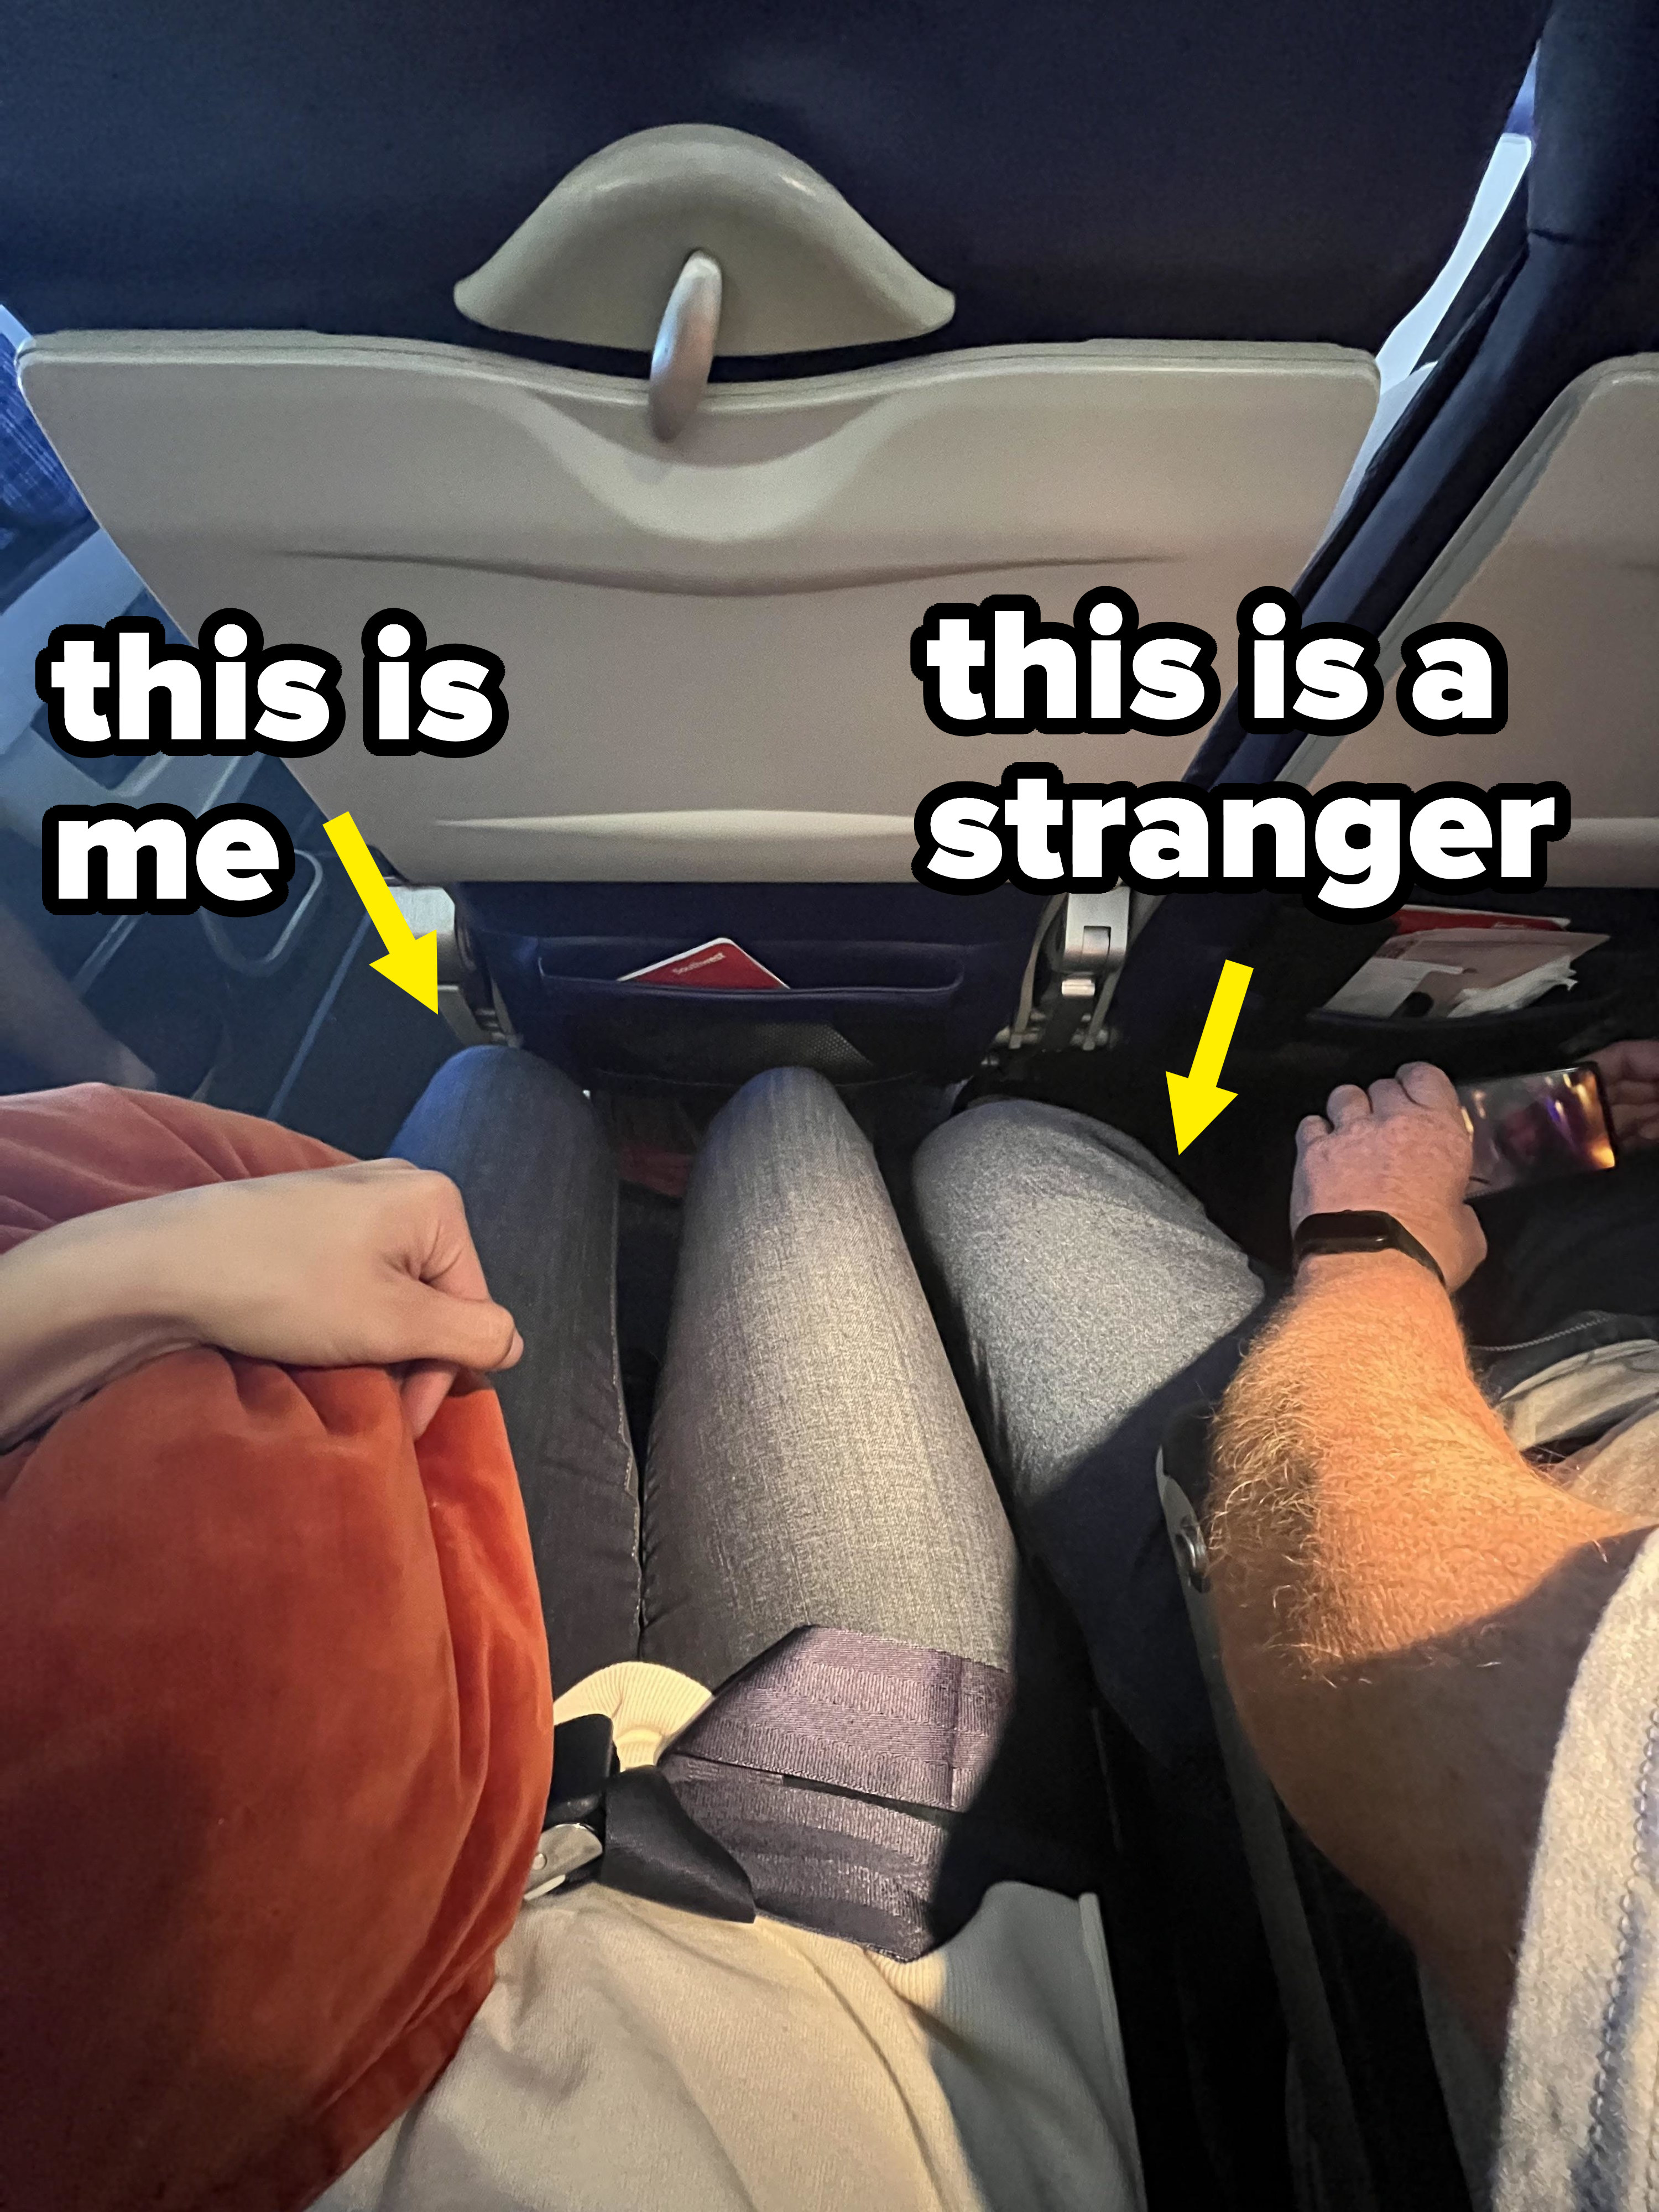 A person sitting on a plane with their legs scrunched together as a guy has his spread legs extending into their space